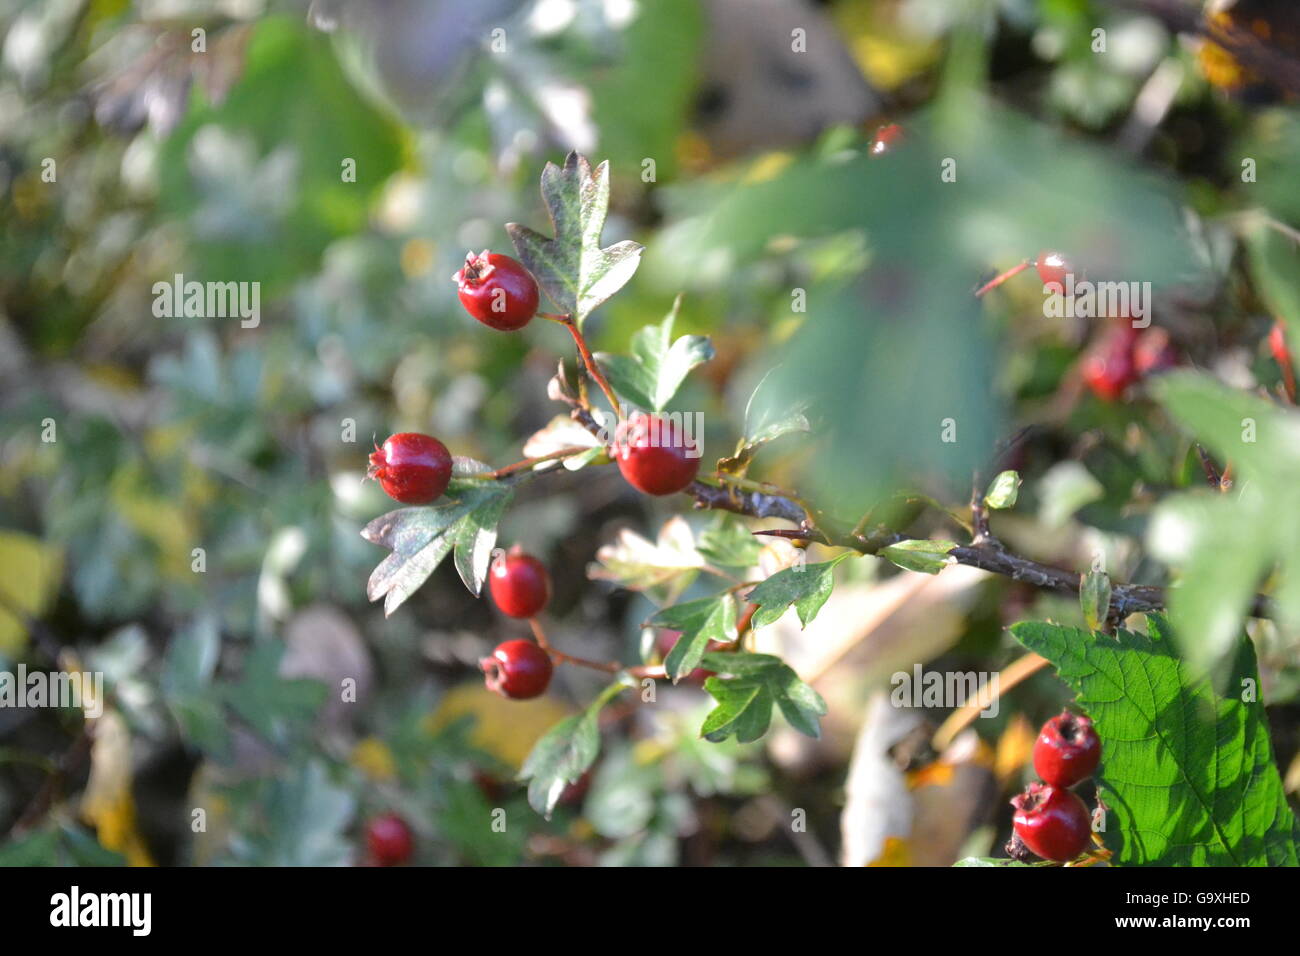 Hawthorn shrub with shiny red berries and green foliage leaves, Stock Photo